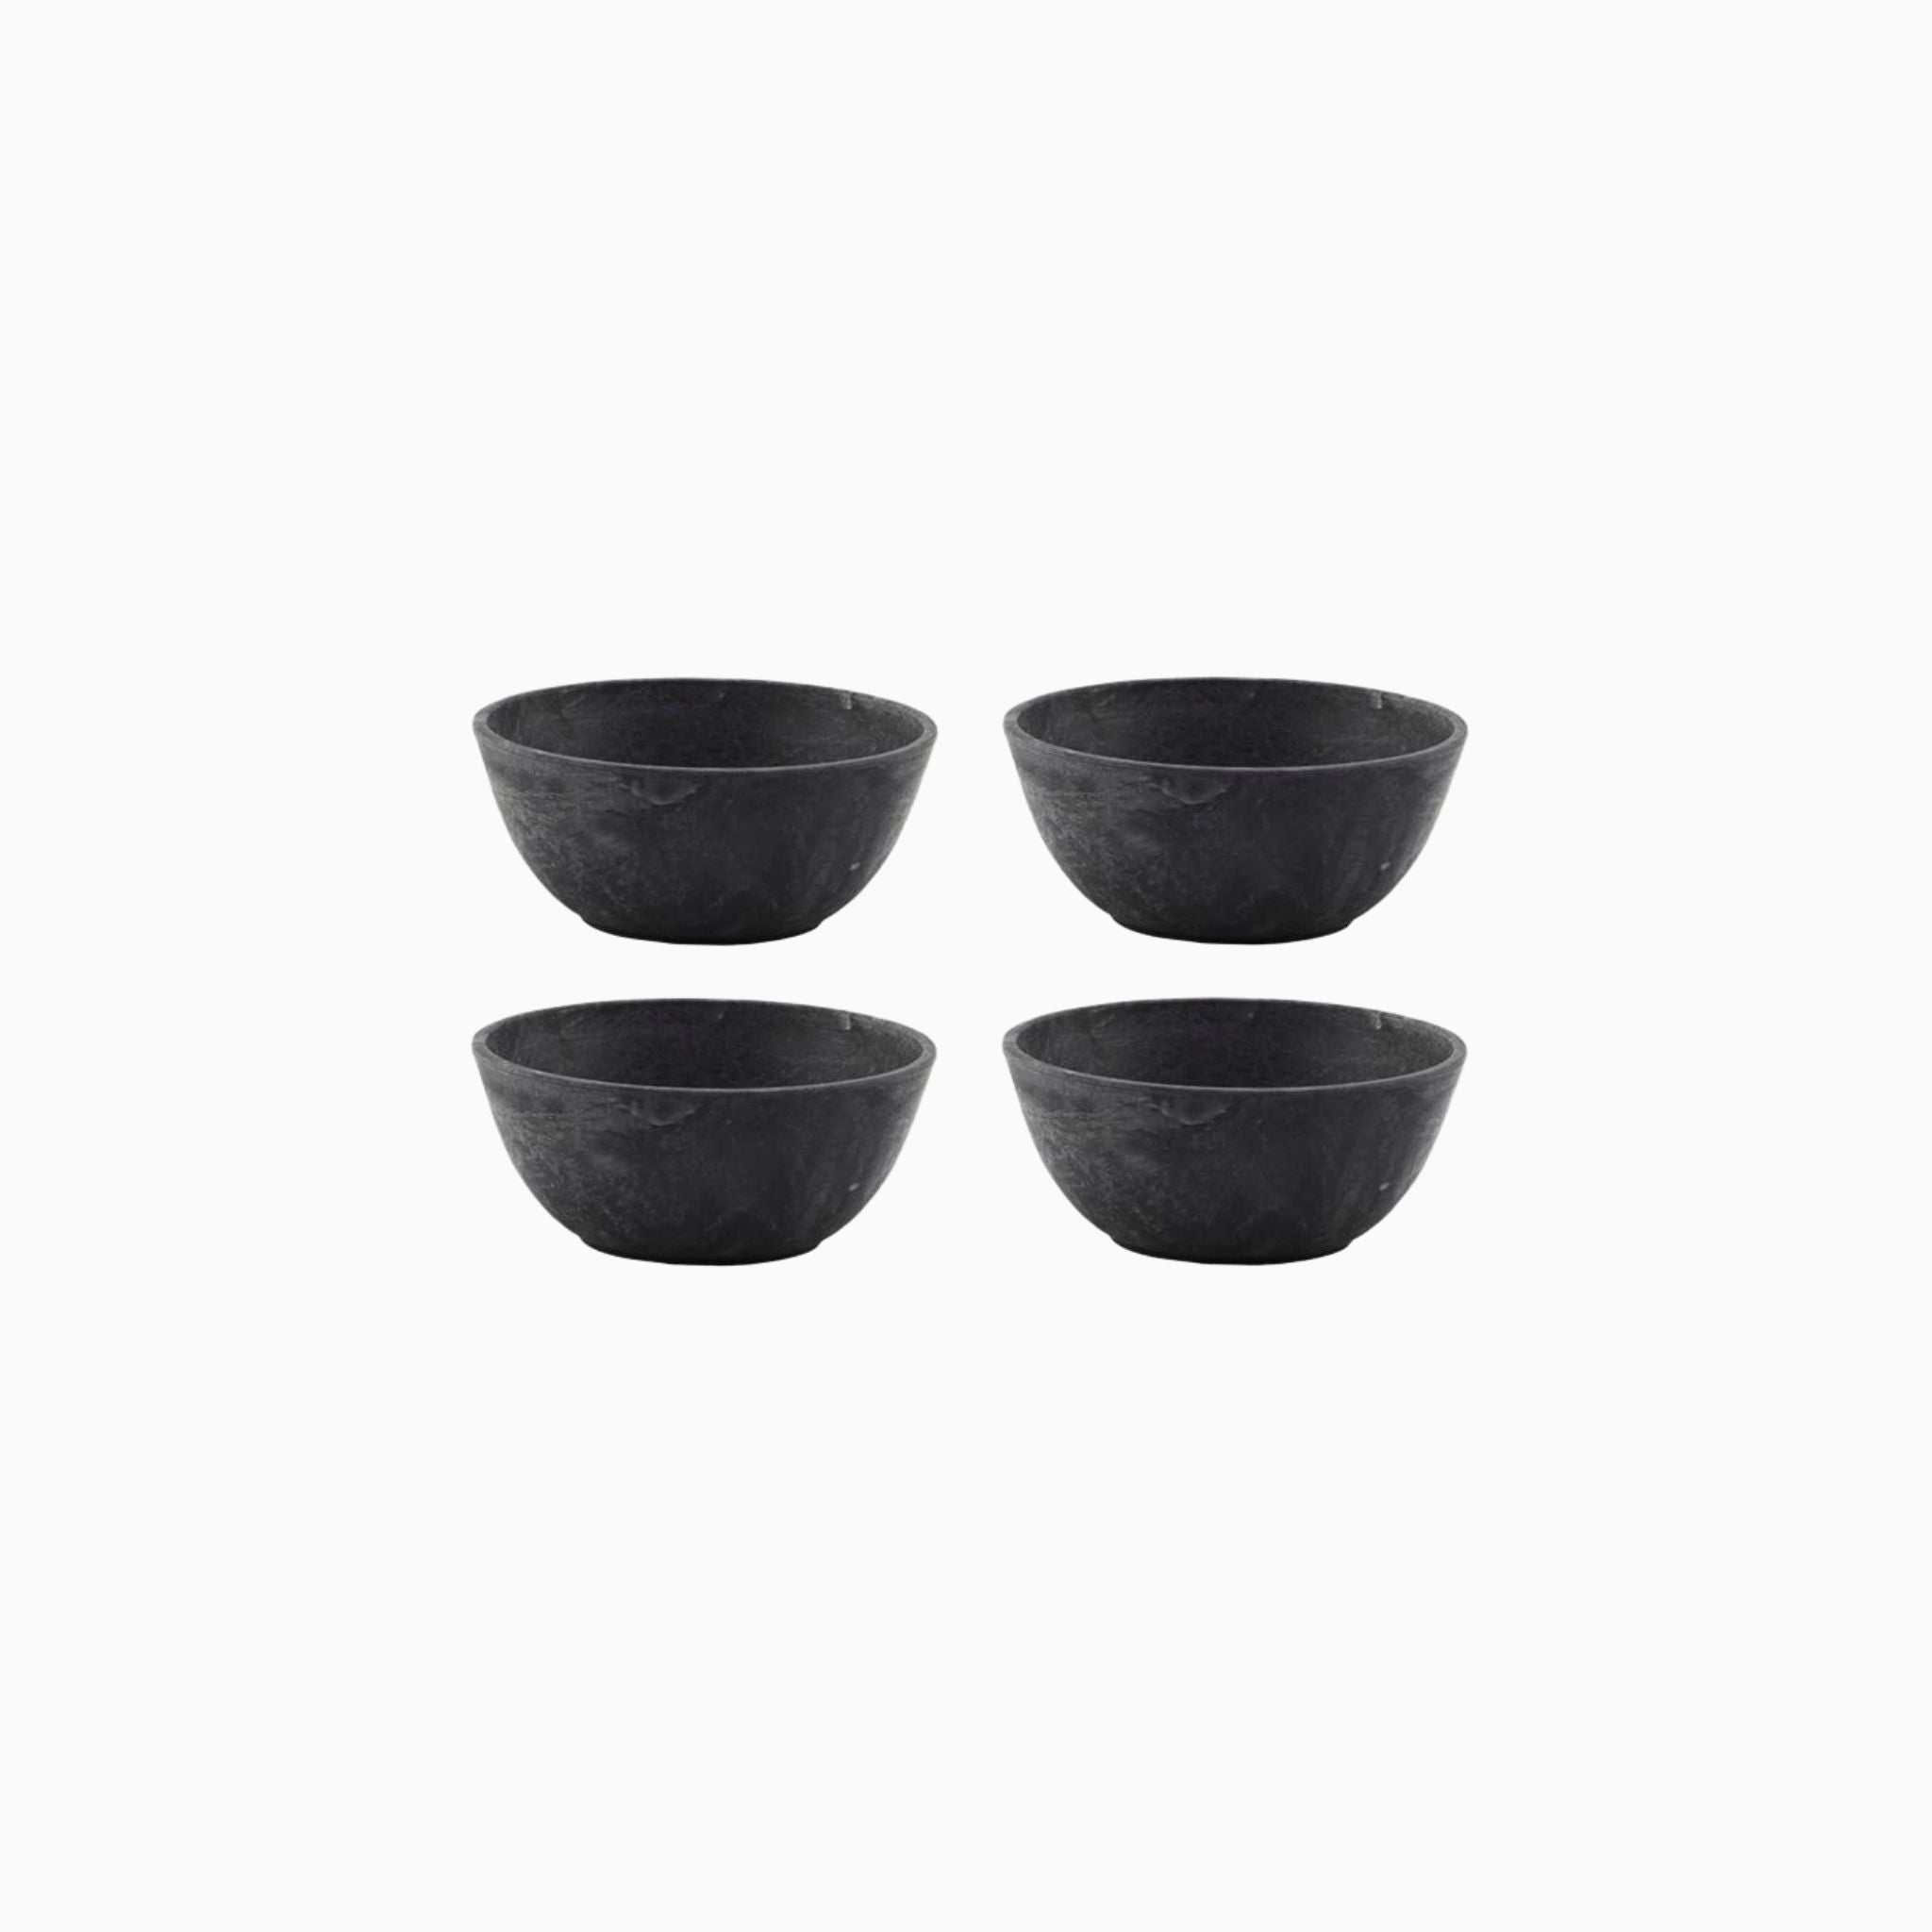 BLACK SERVING BOWLS - SET OF 4 - Simply Elevated Home Furnishings 